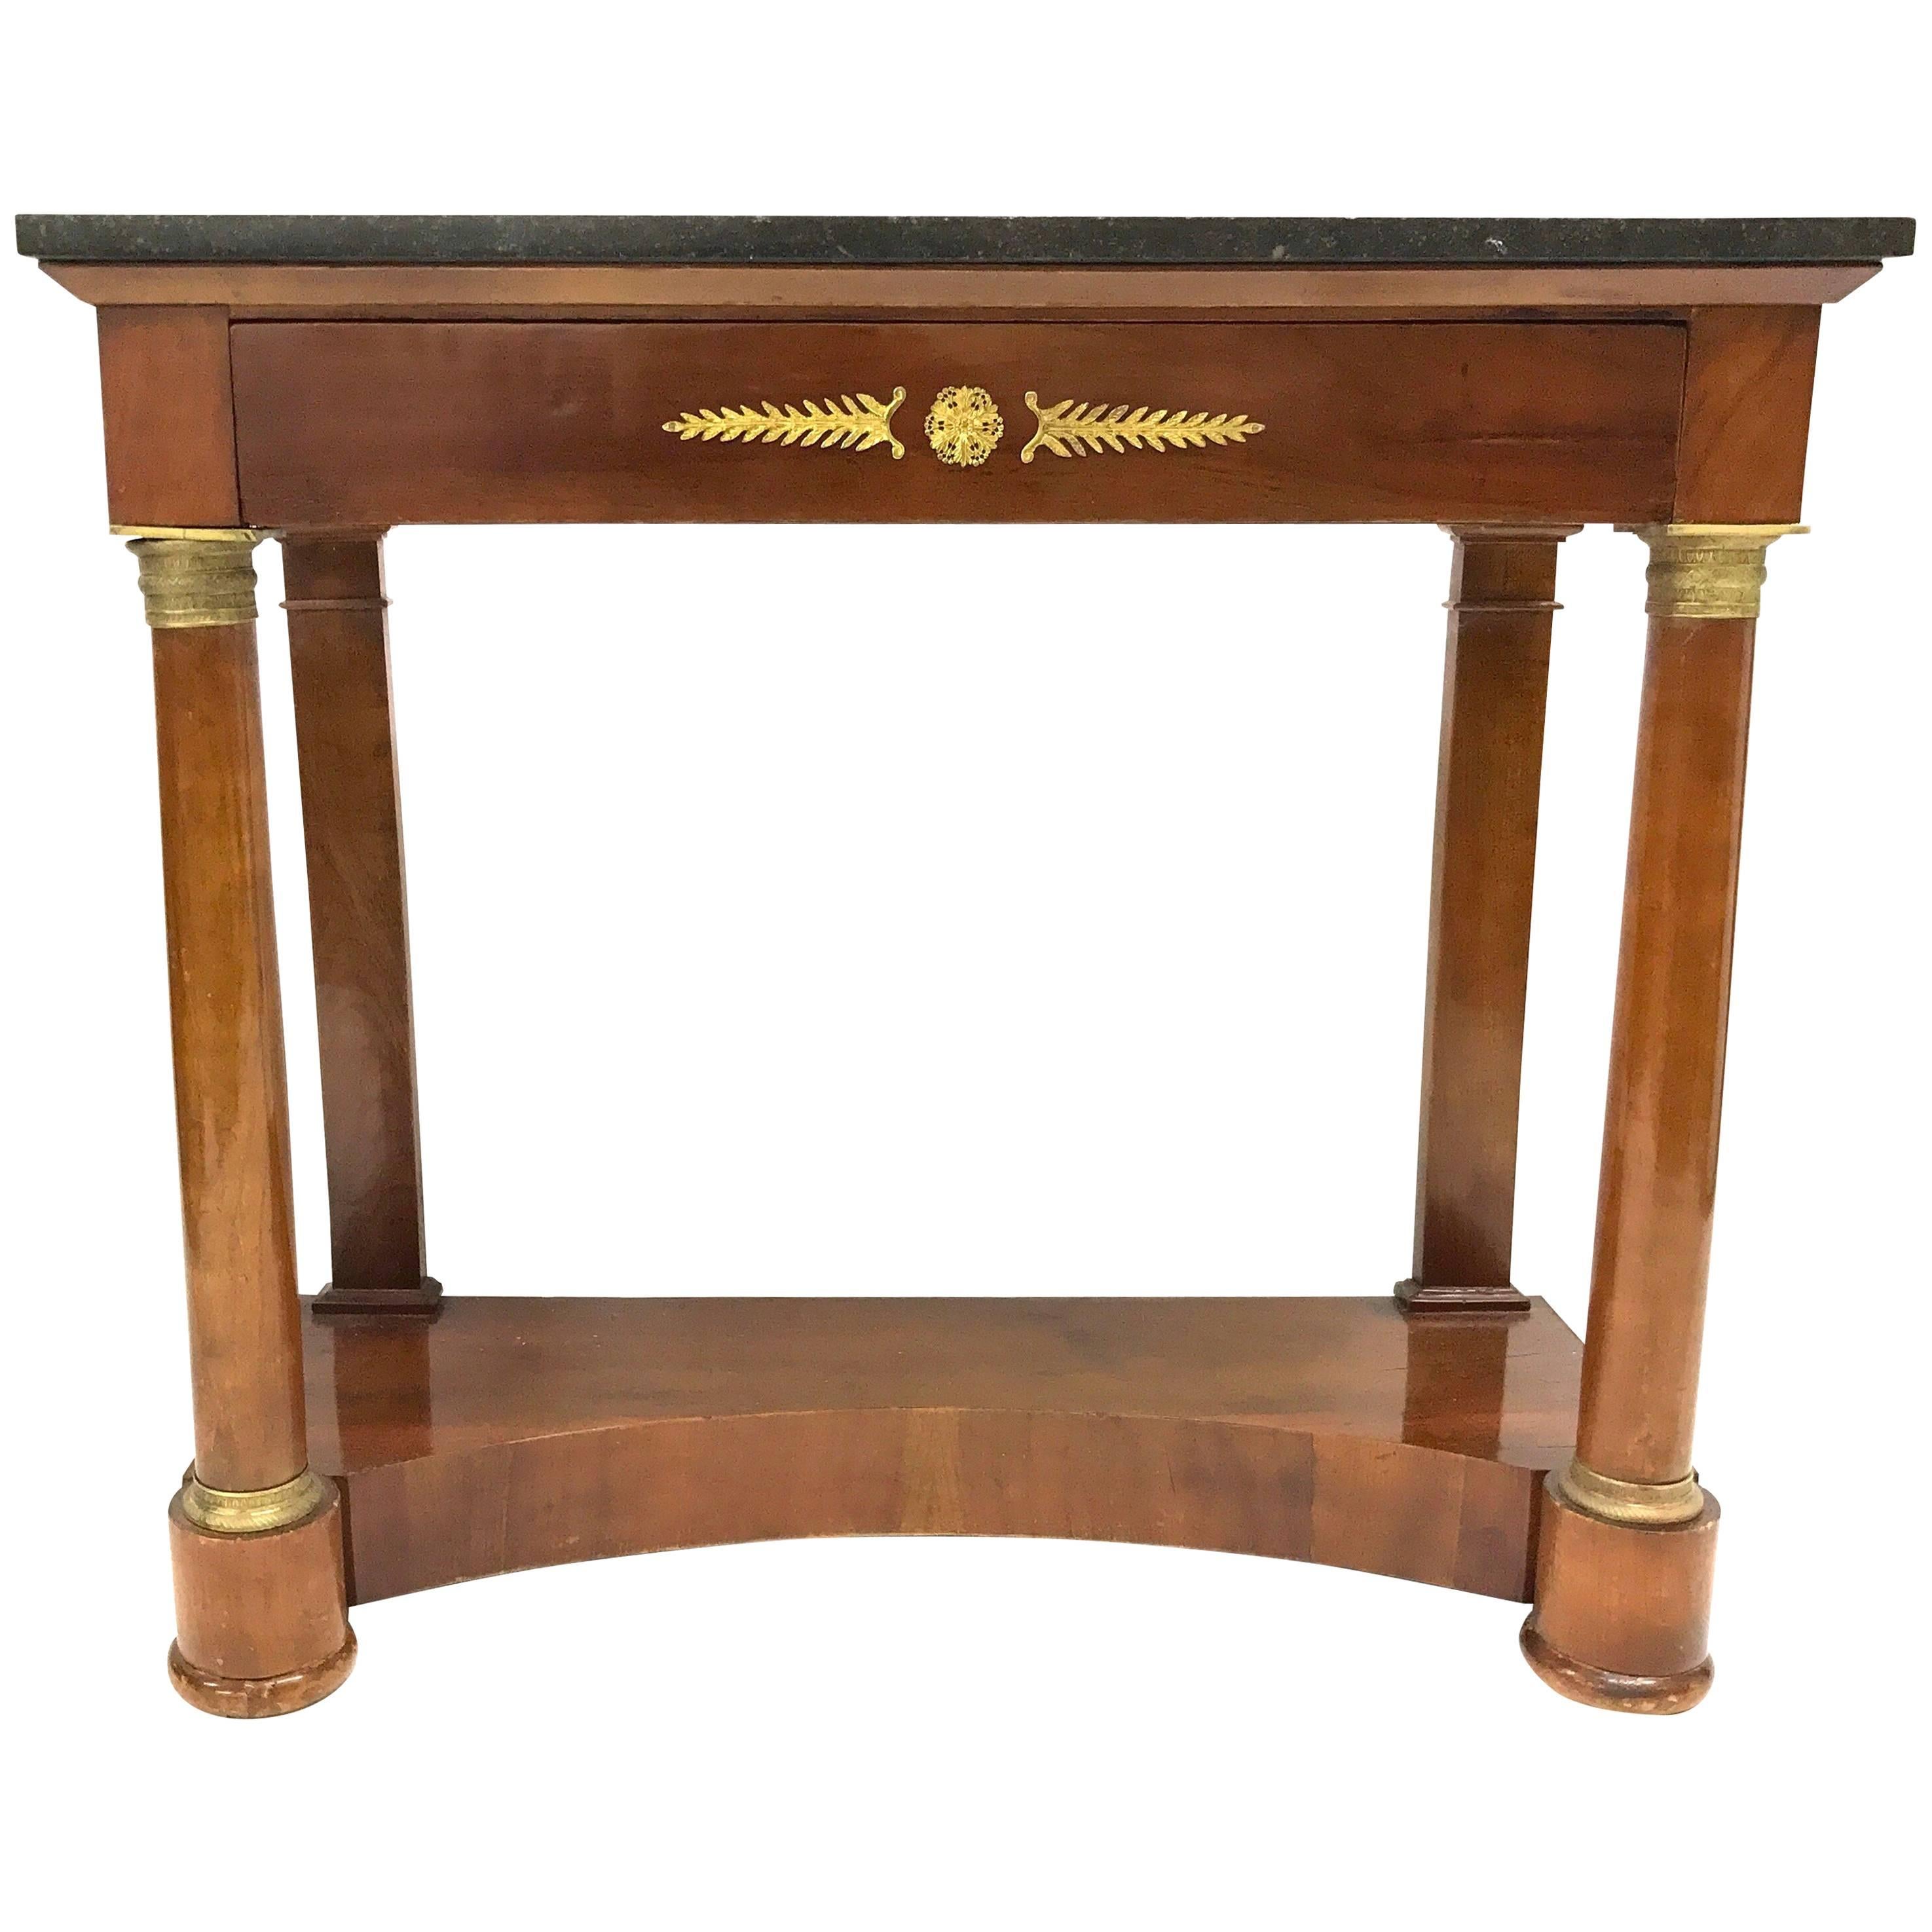 19th Century French Empire Console Table